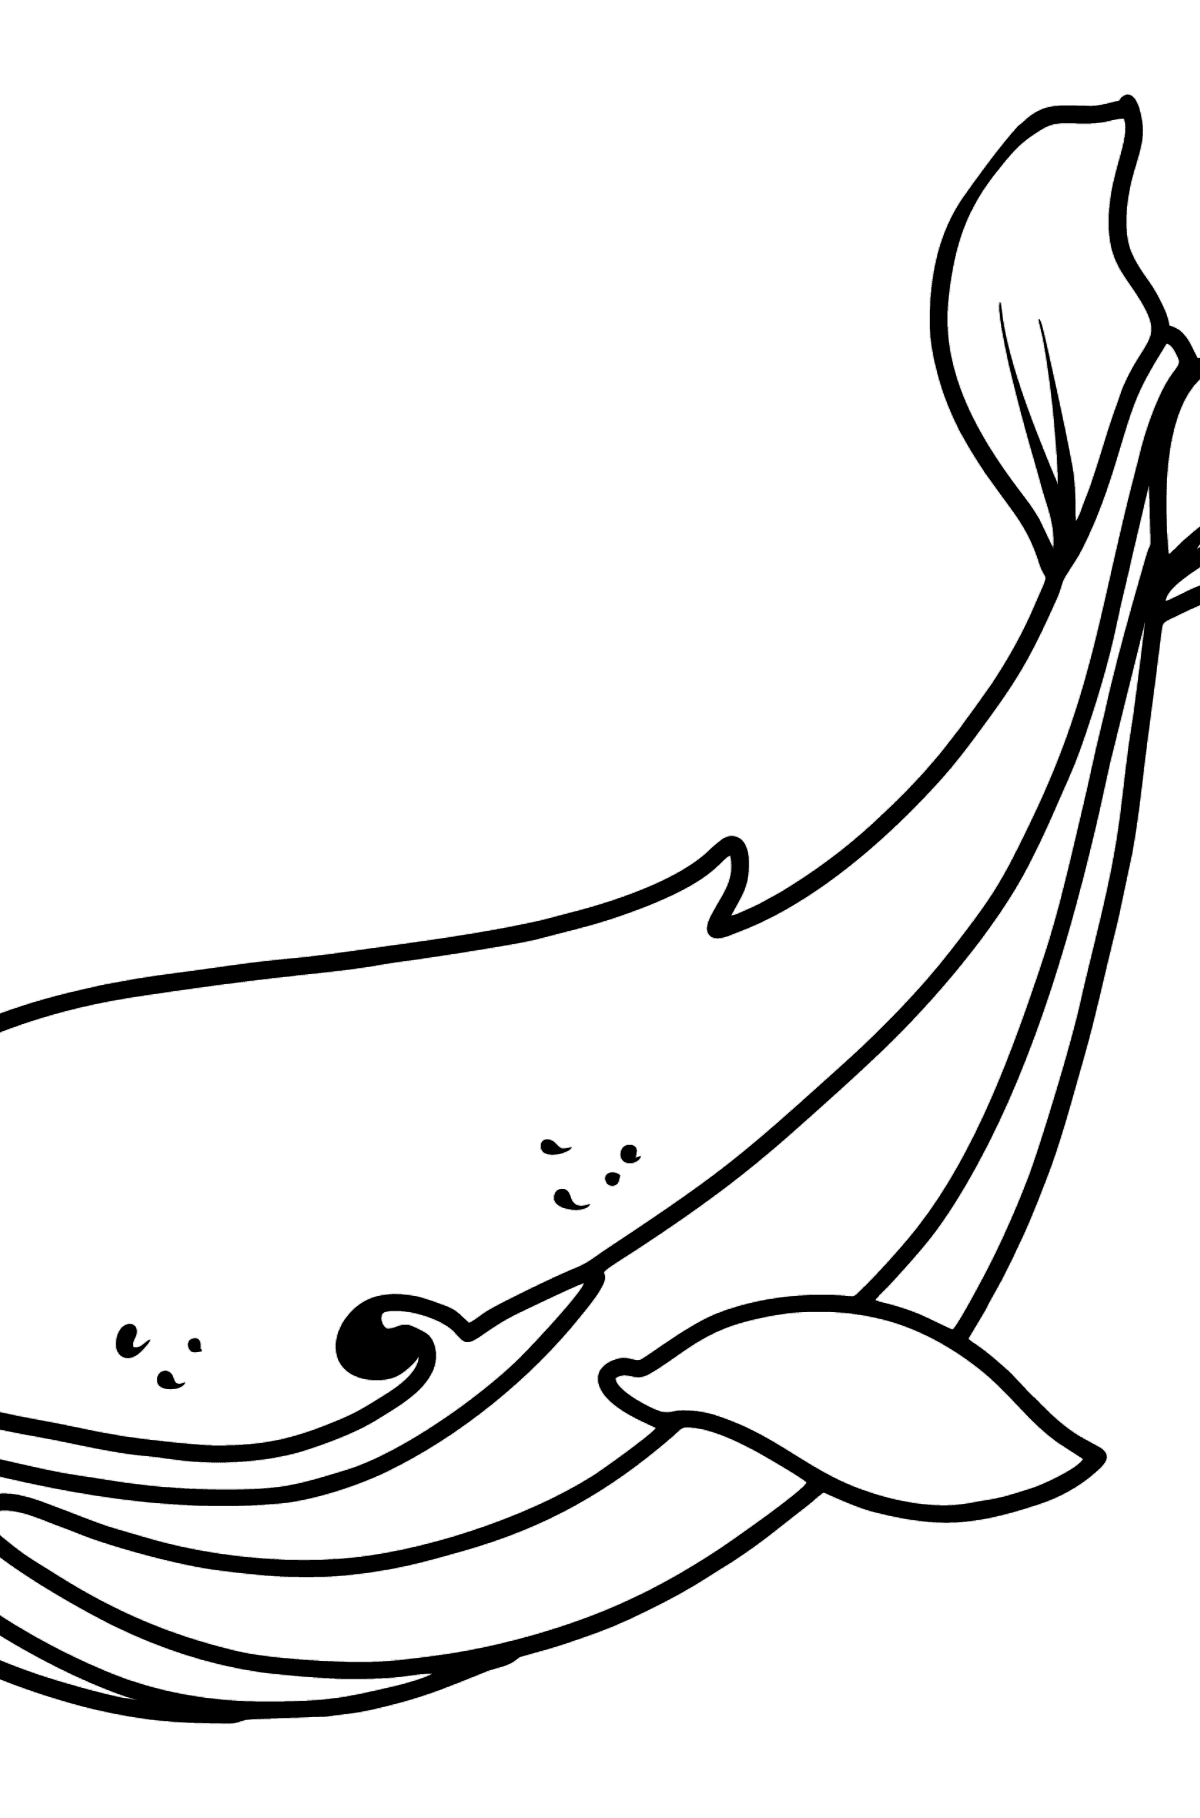 Cachalot coloring page - Coloring Pages for Kids